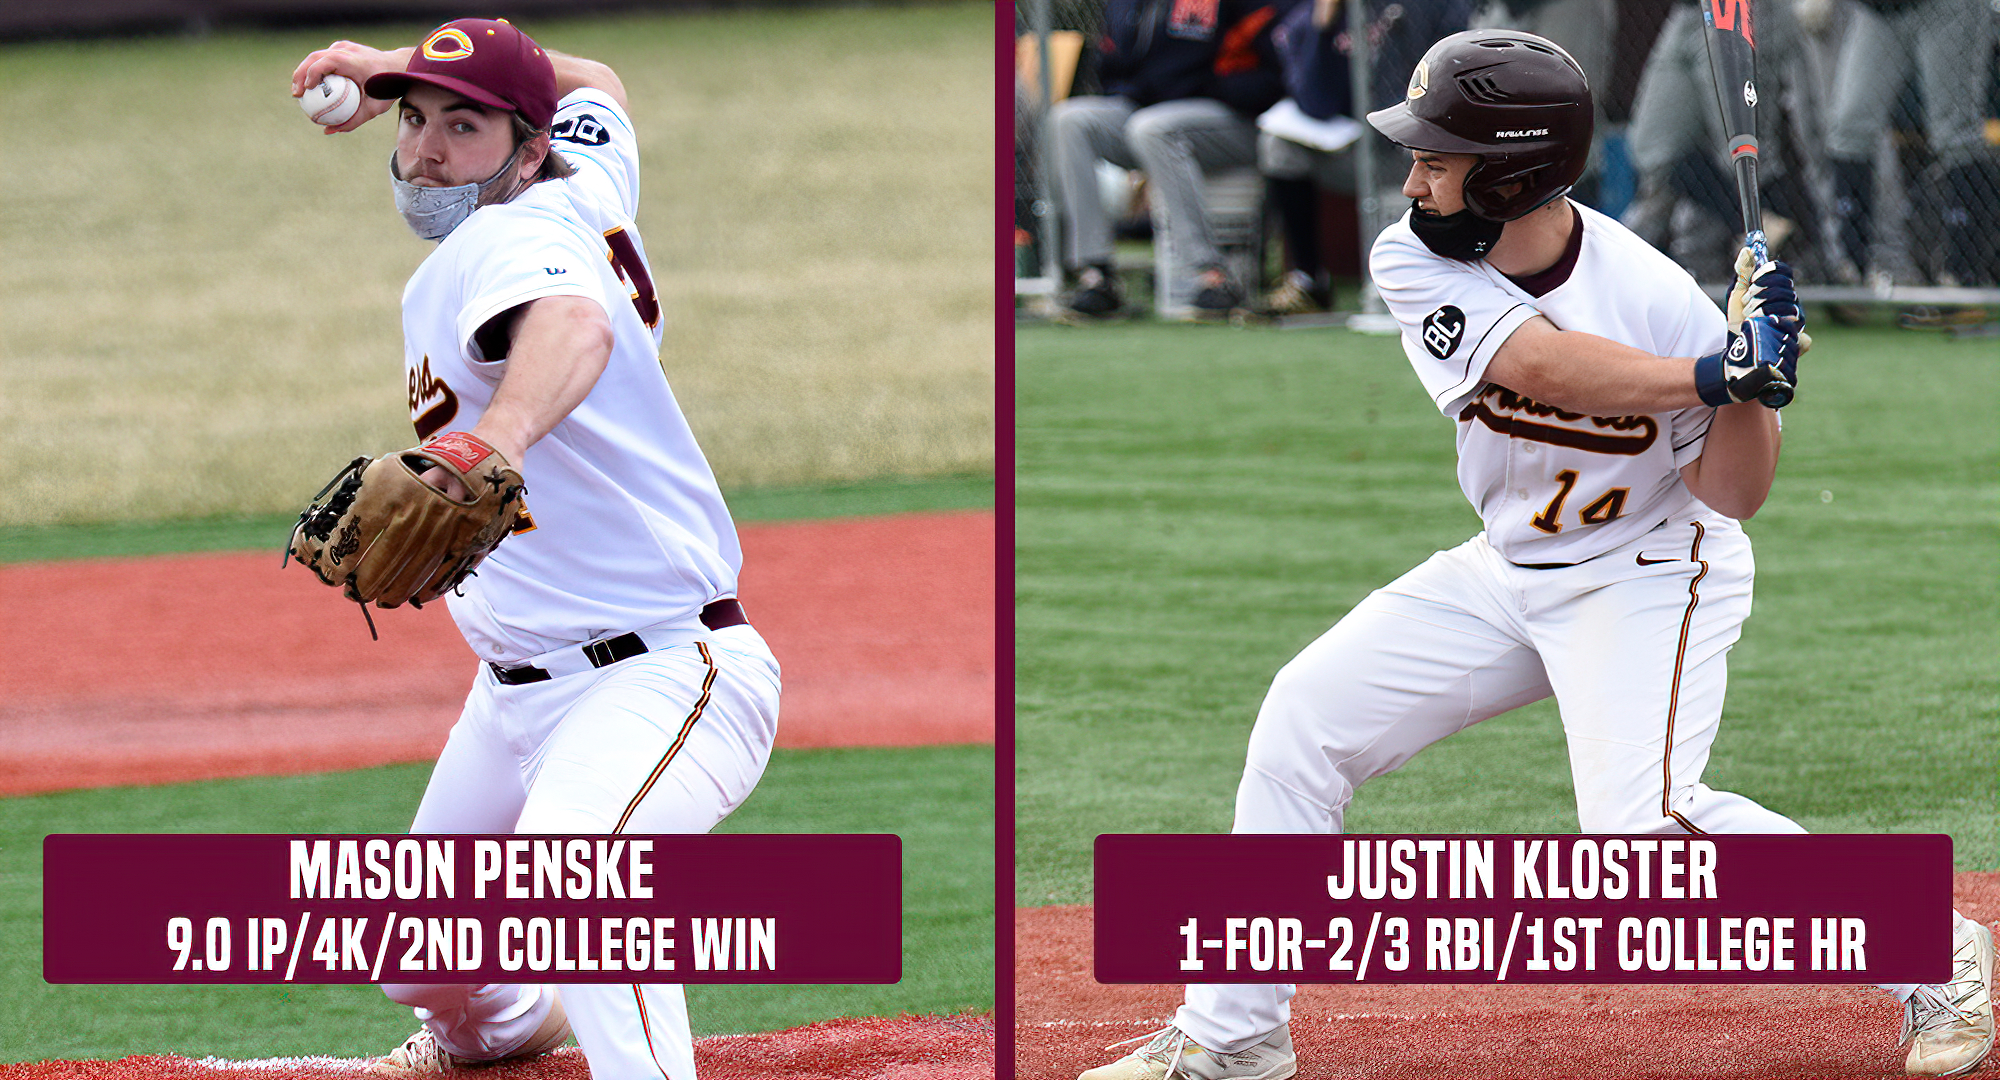 Senior Mason Penske (L) and sophomore Justin Kloster were the co-stars of the Cobbers' win over Macalester. Penske pitched all nine innings & Kloster hit the game-winning HR.